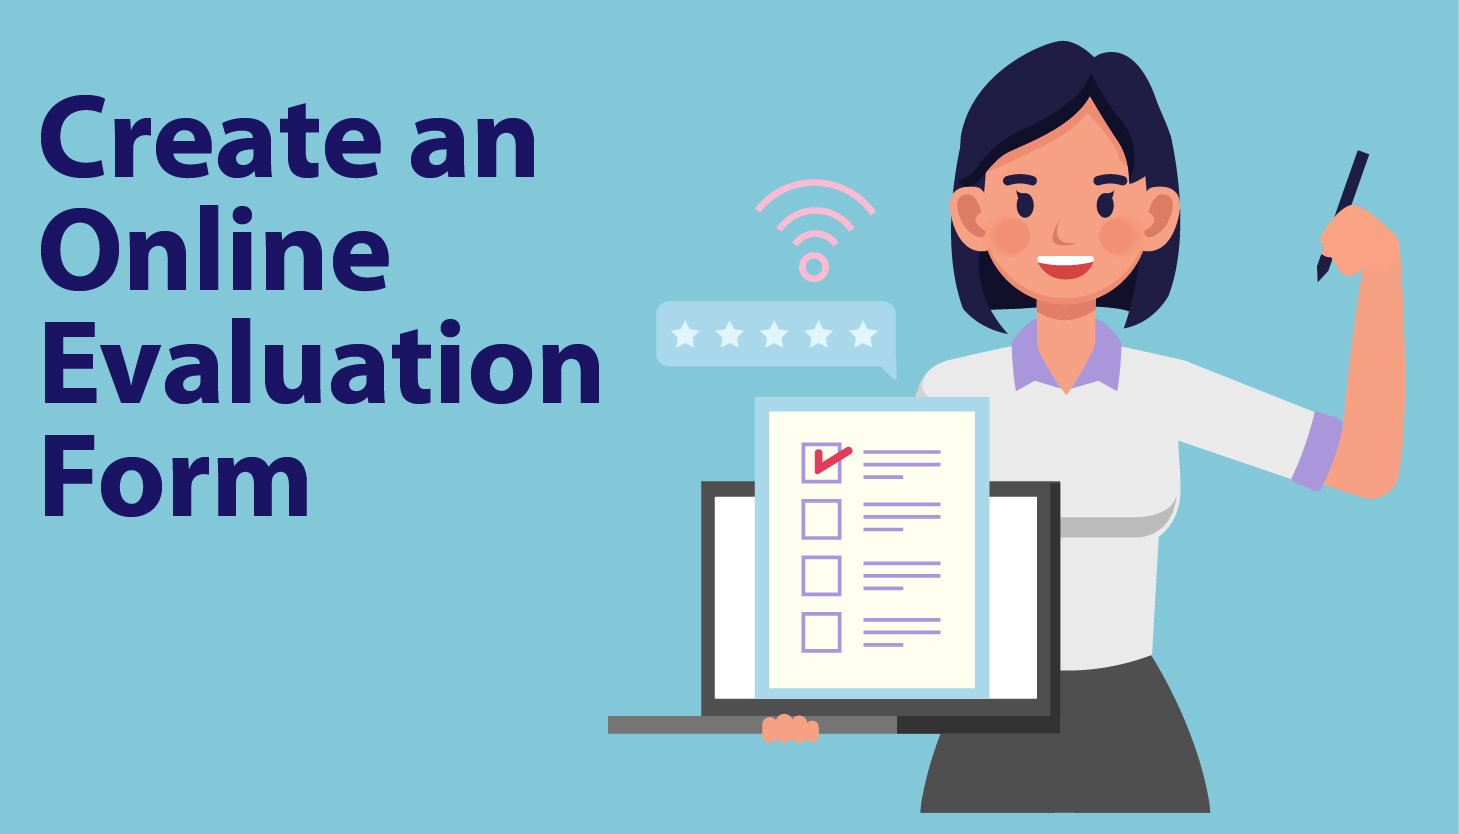  Tips and Tricks to Create an Online Evaluation Form